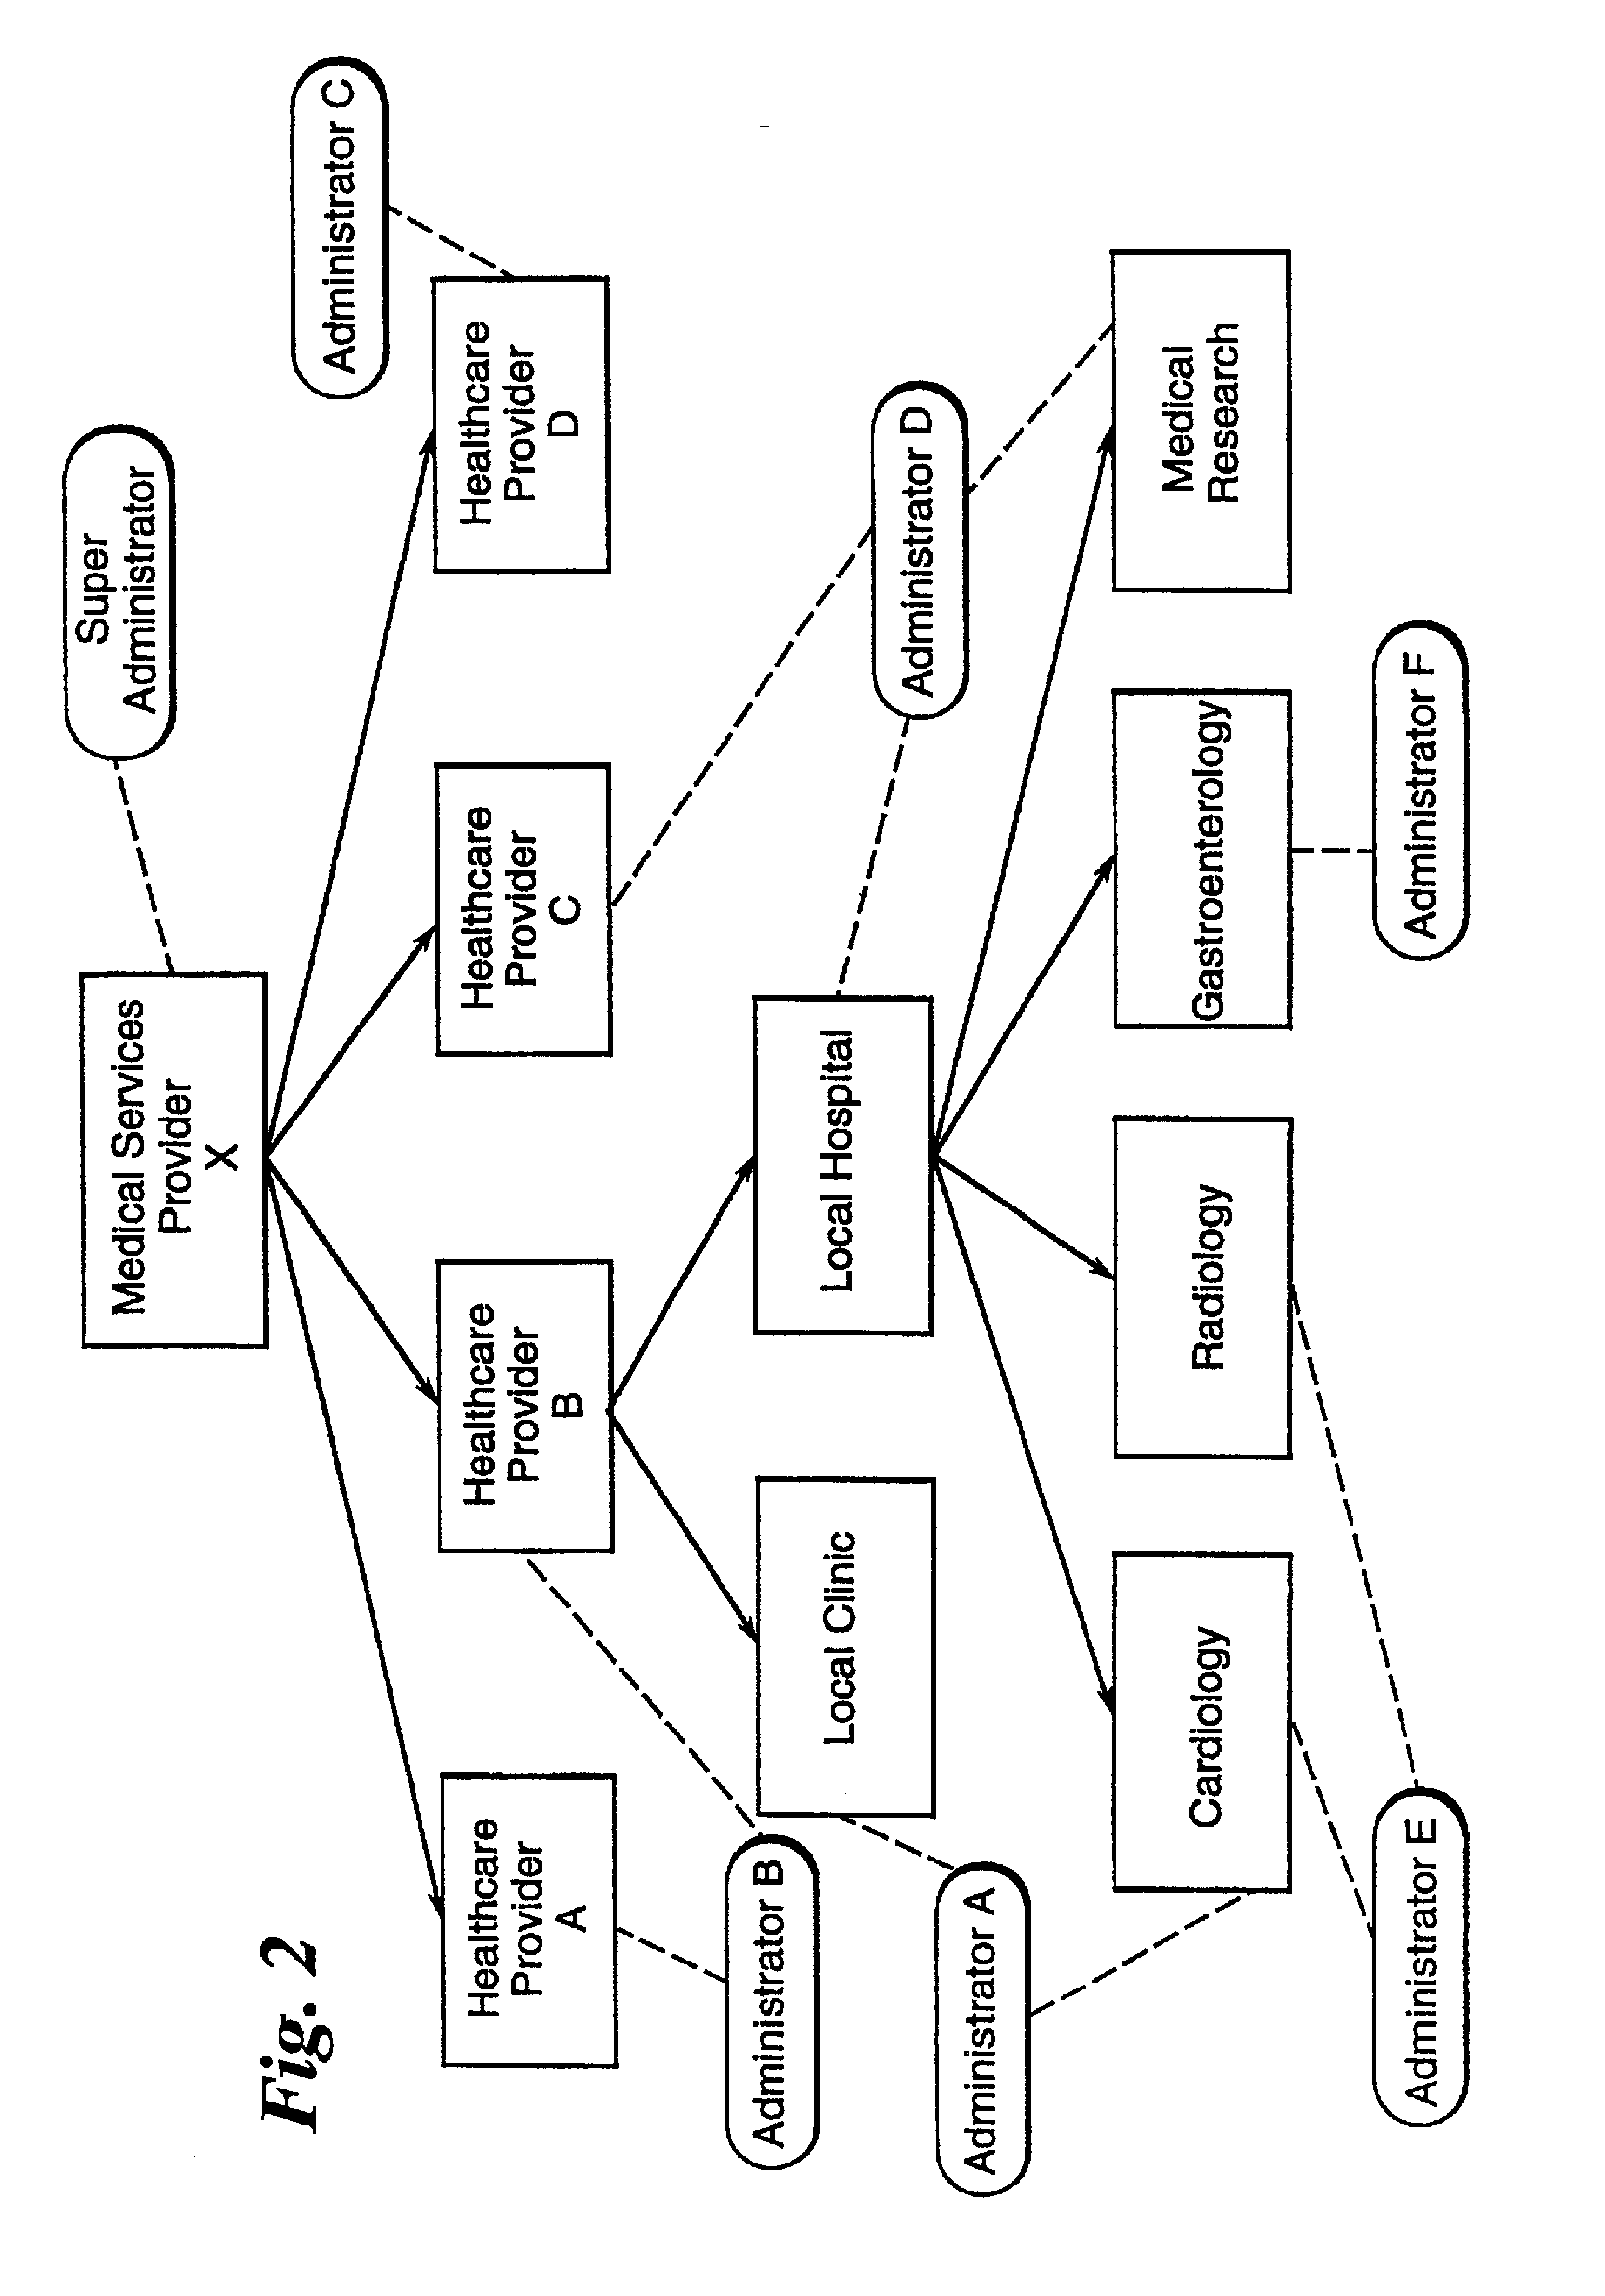 Searching and matching a set of query strings used for accessing information in a database directory